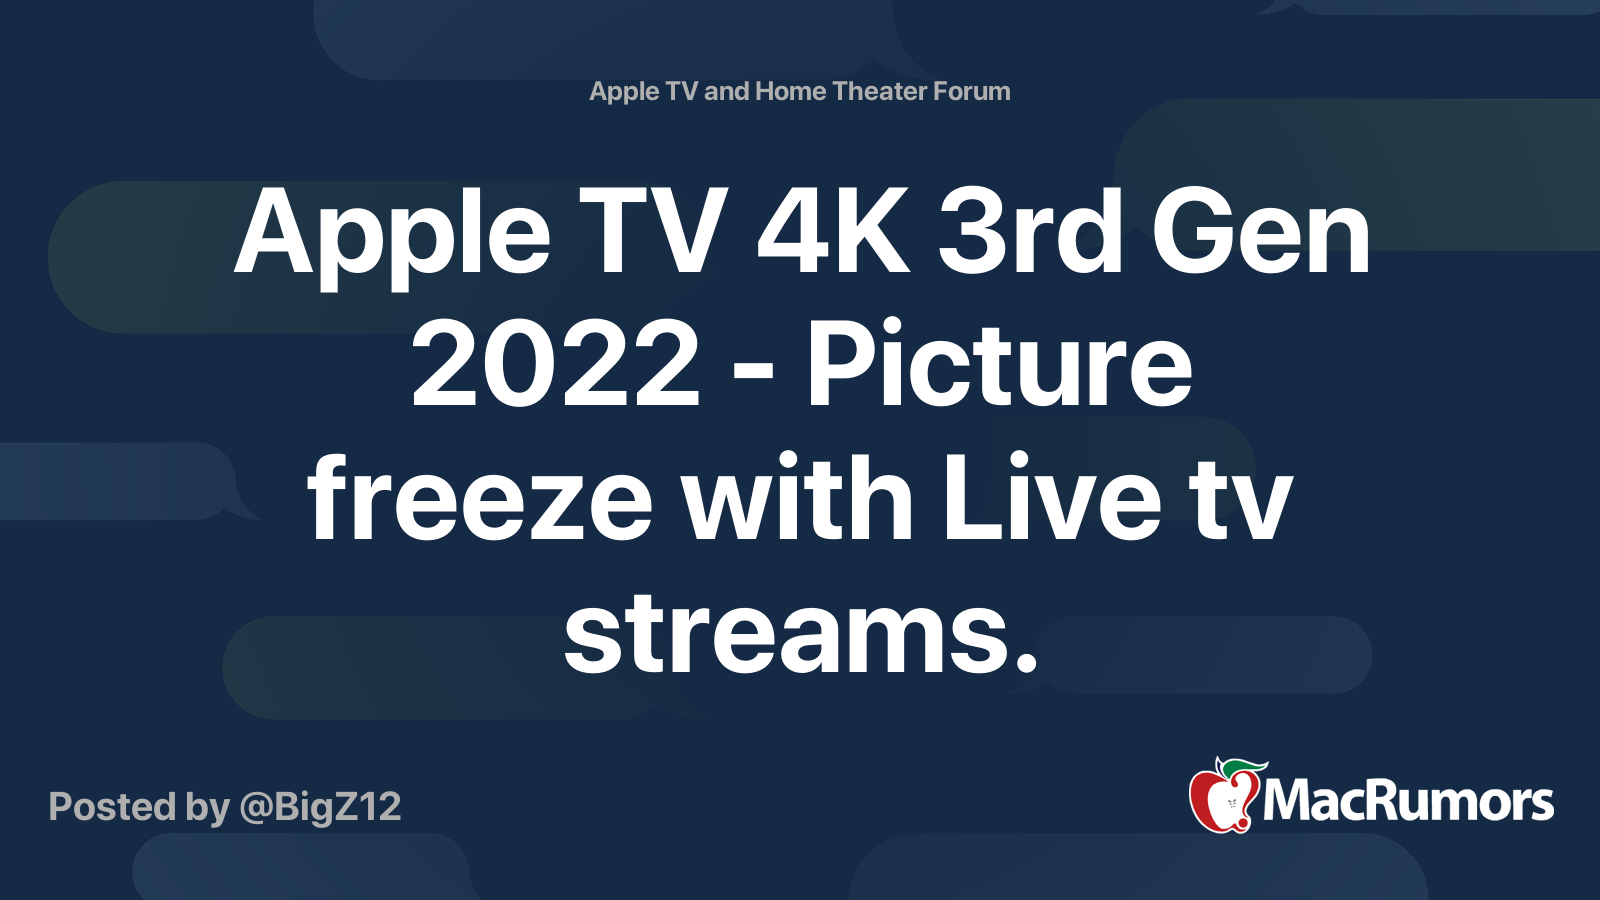 Apple TV 4K Gen 2022 - Picture freeze with Live tv streams. Forums